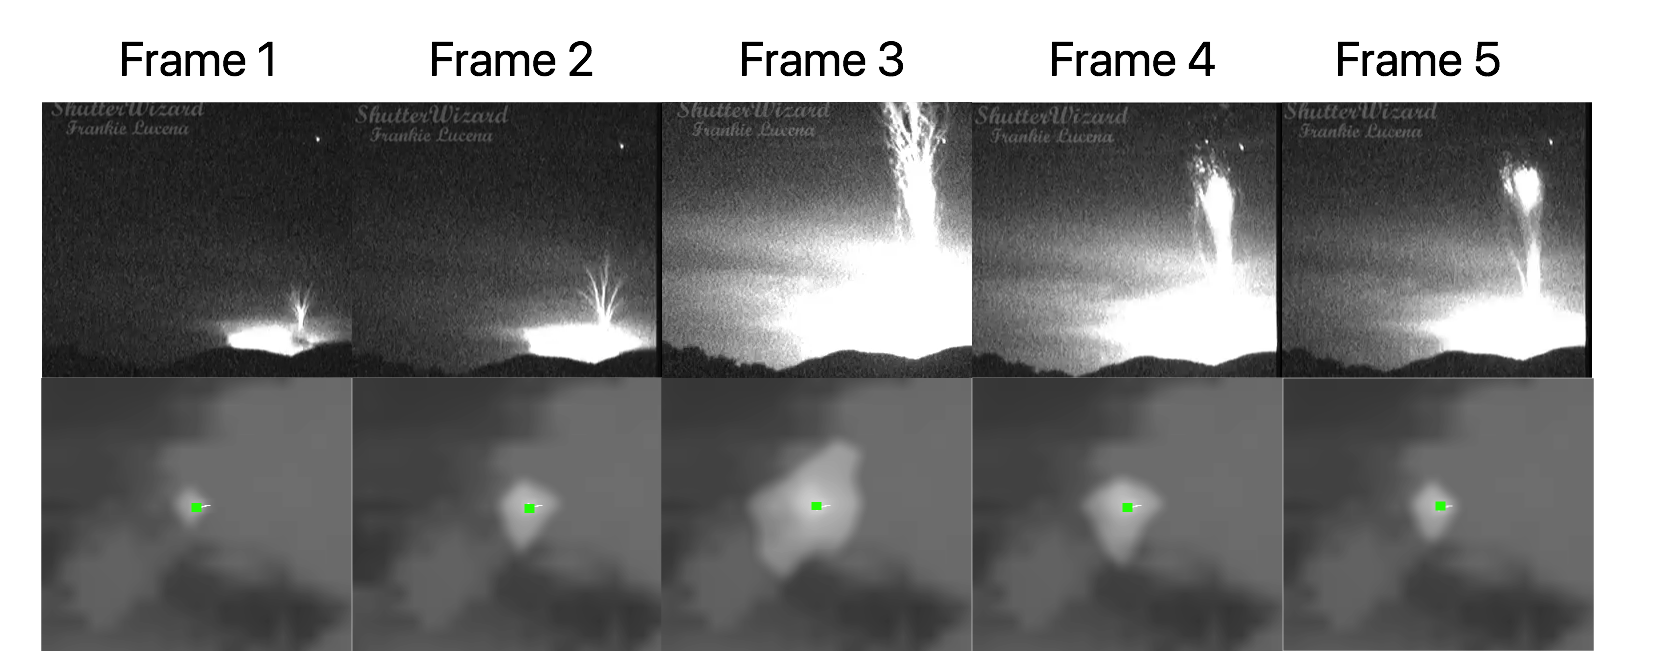 NOAA GOES East Satellite Captures the First Images from Space of Gigantic Jet Lightning